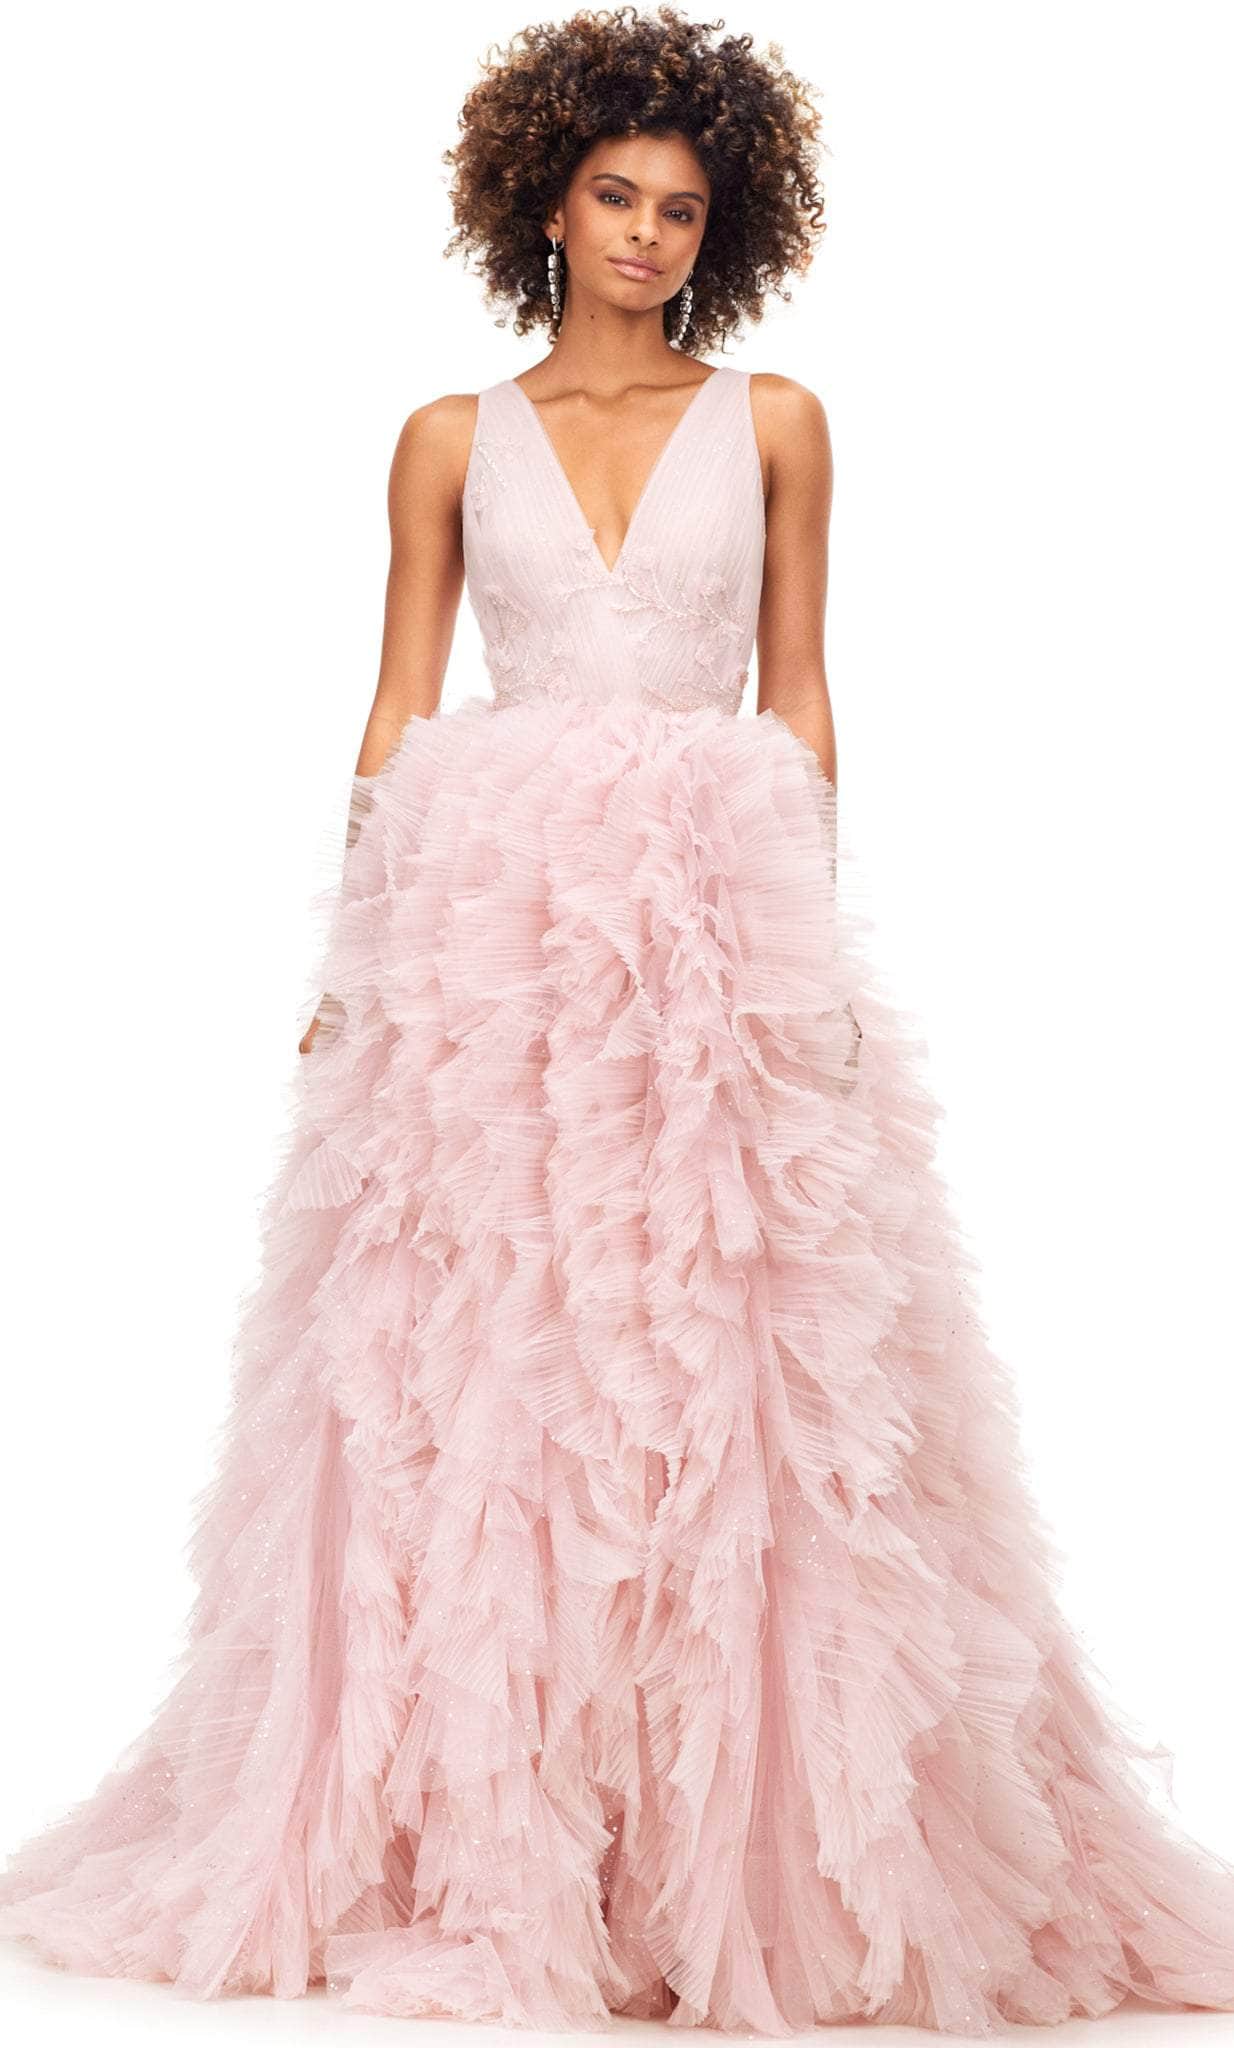 Image of Ashley Lauren 11233 - A-line Ruffled Voluminous Tulle Gown